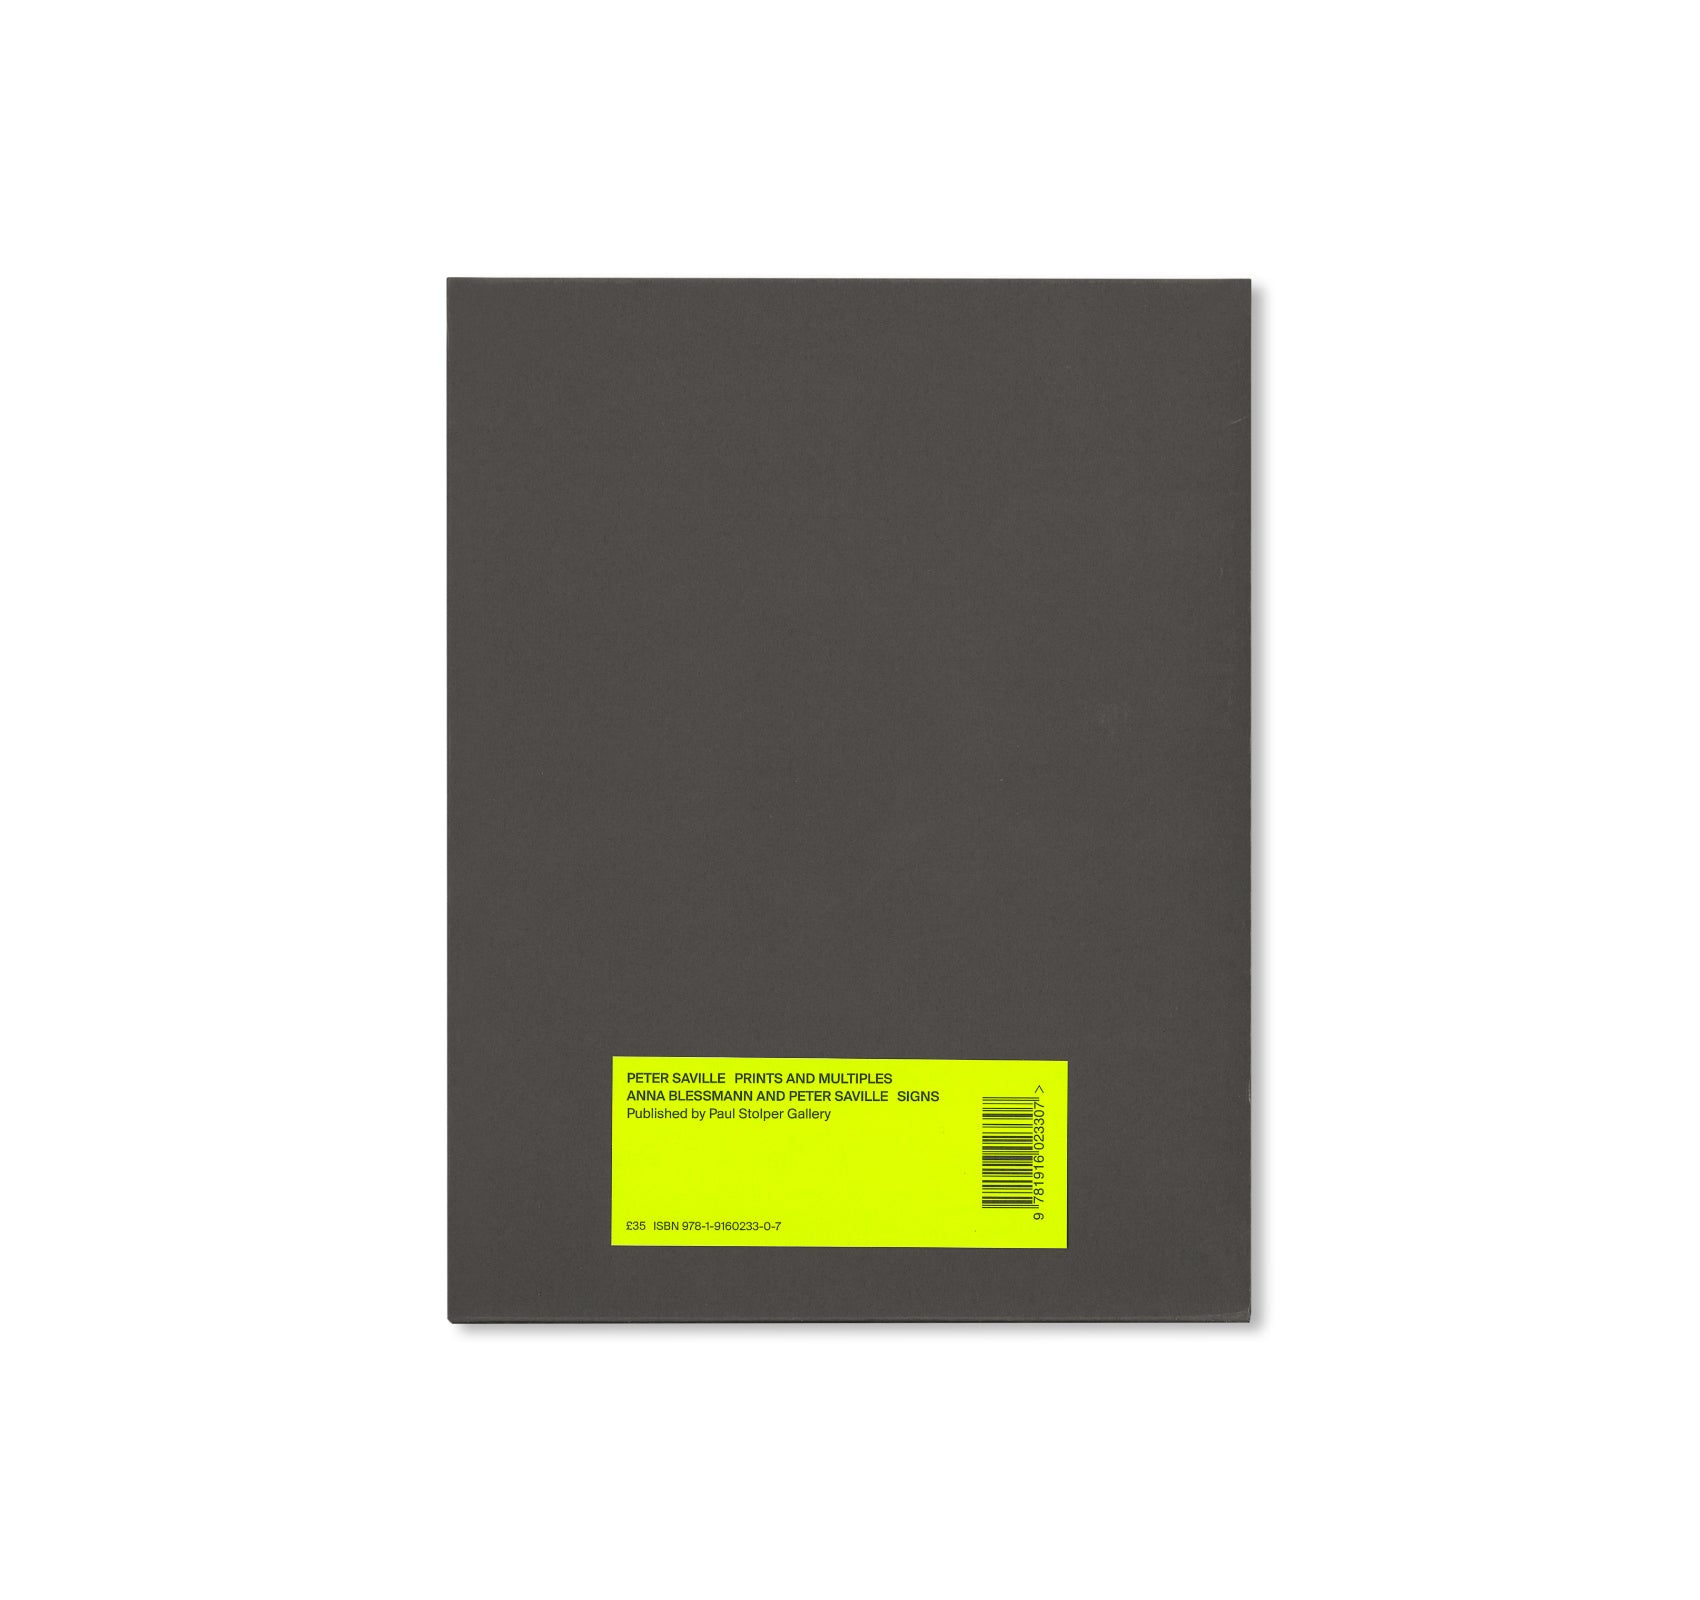 PRINTS AND MULTIPLES/ANNA BLESSMANN AND PETER SAVILLE by Peter Saville [SPECIAL EDITION]